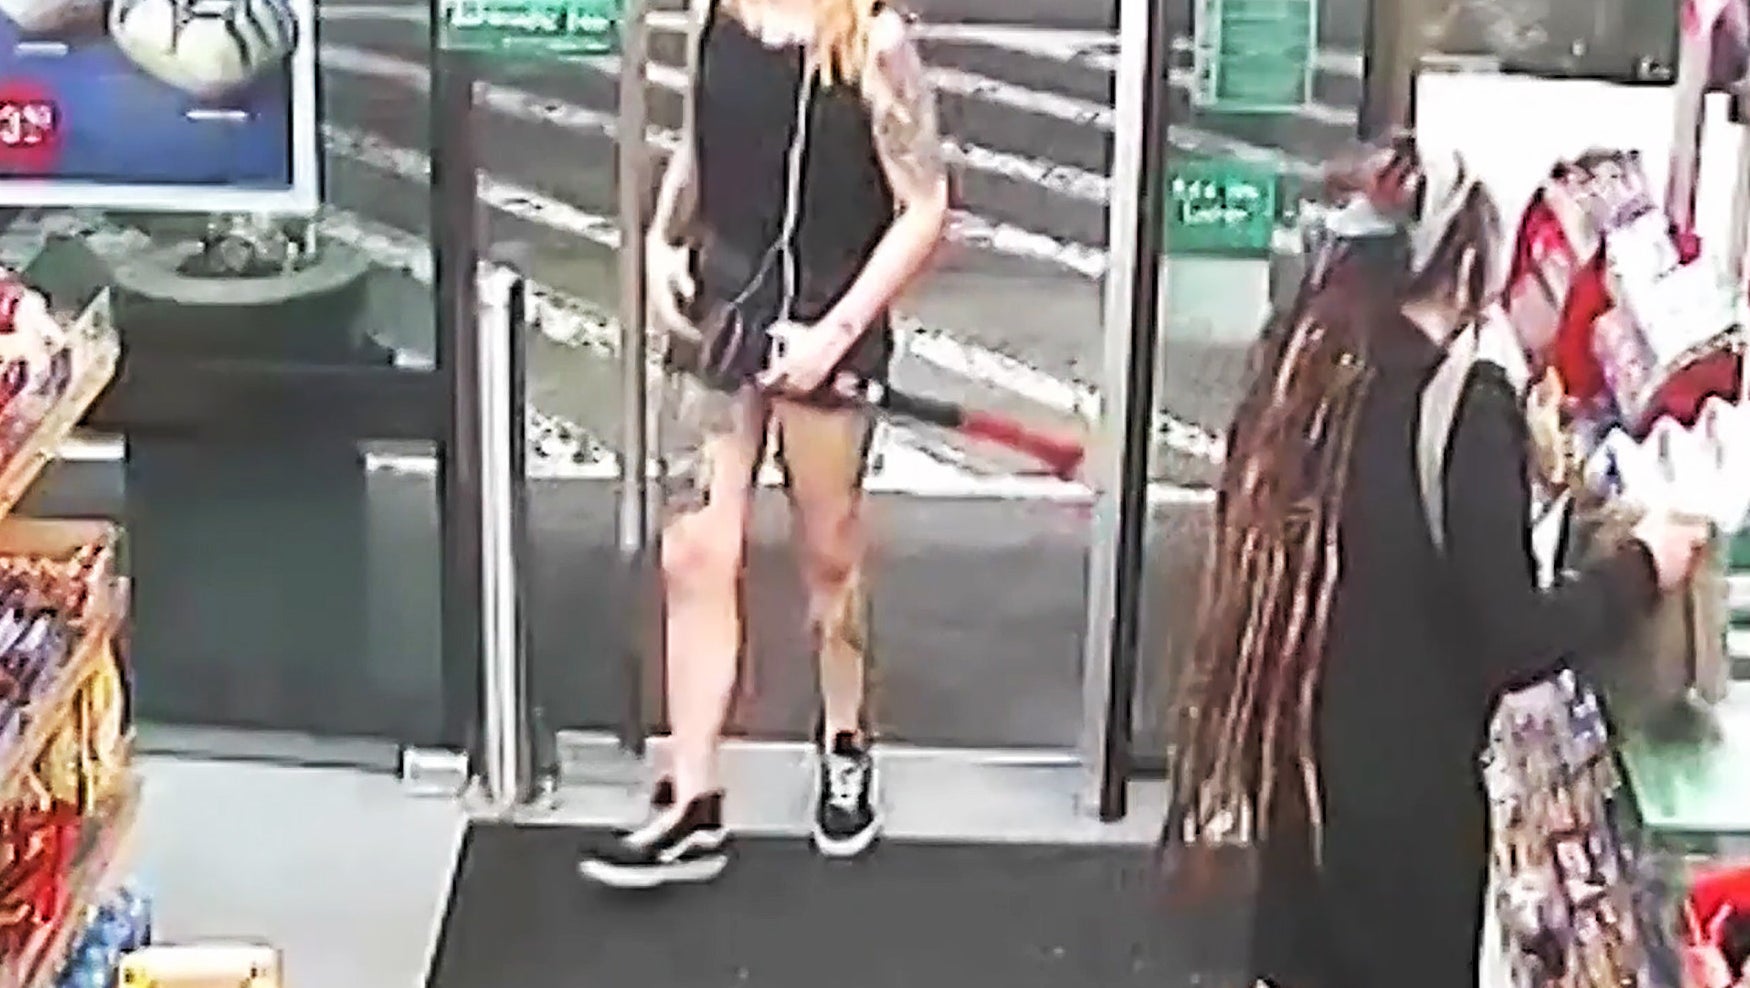 Axe And Girls Sex Videos - Woman Who Attacked Strangers With An Axe In 7-Eleven Has Jail Sentence  Increased